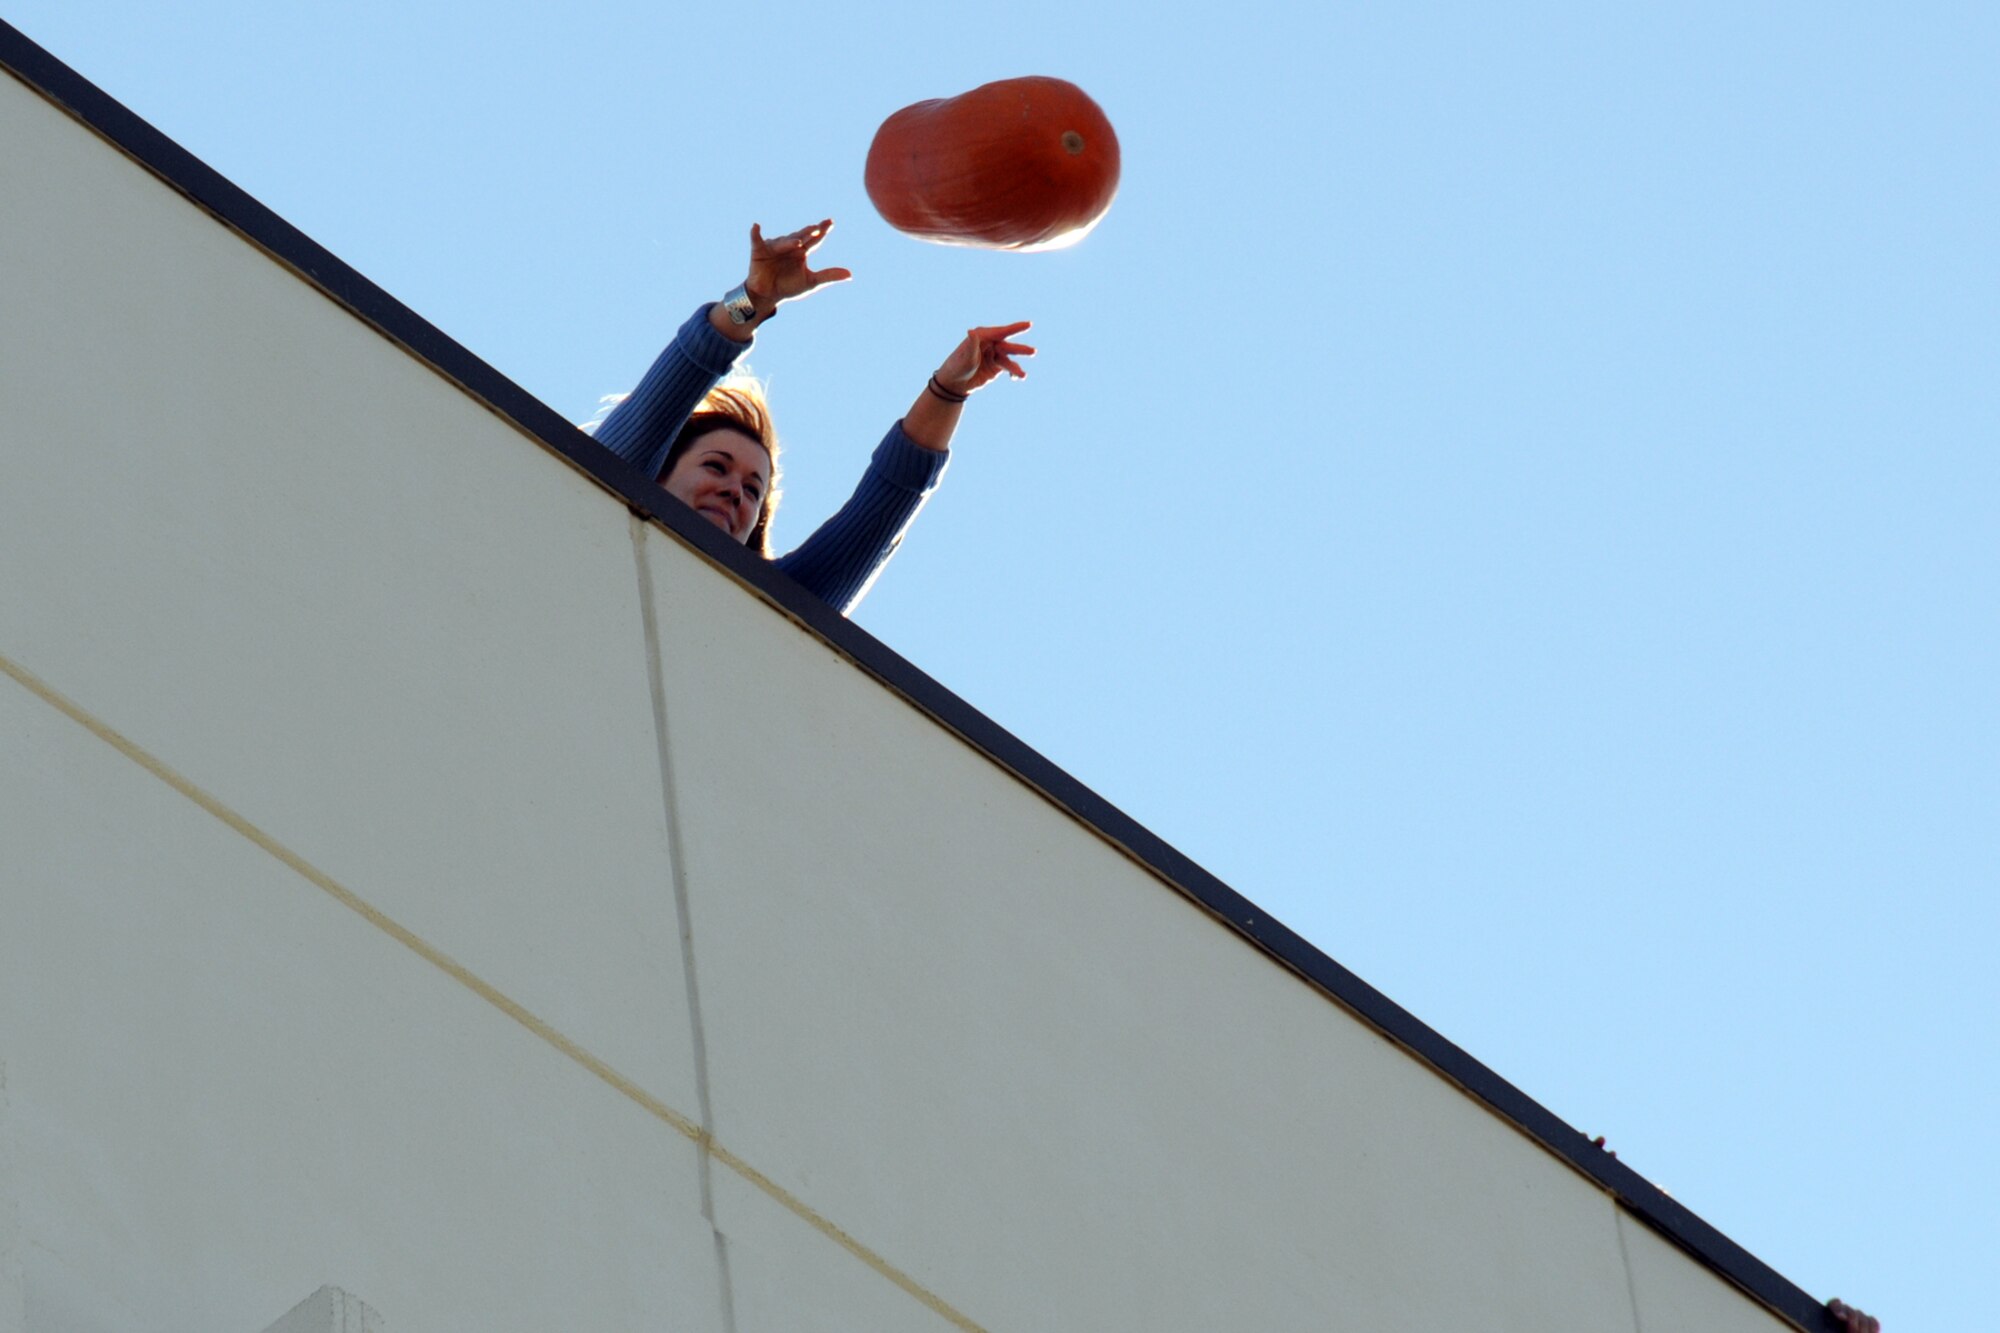 EGLIN AIR FORCE BASE, Fla. – Jasmine DeNamur, 96th Air Base Wing Public Affairs, tosses a pumpkin from the top of a six-story building during a Pumpkin Smash competition Nov. 12. The event was hosted by the 53rd Wing as a fundraiser for their upcoming Children’s Christmas Party. (U.S. Air Force/ Airman 1st Class Anthony Jennings)